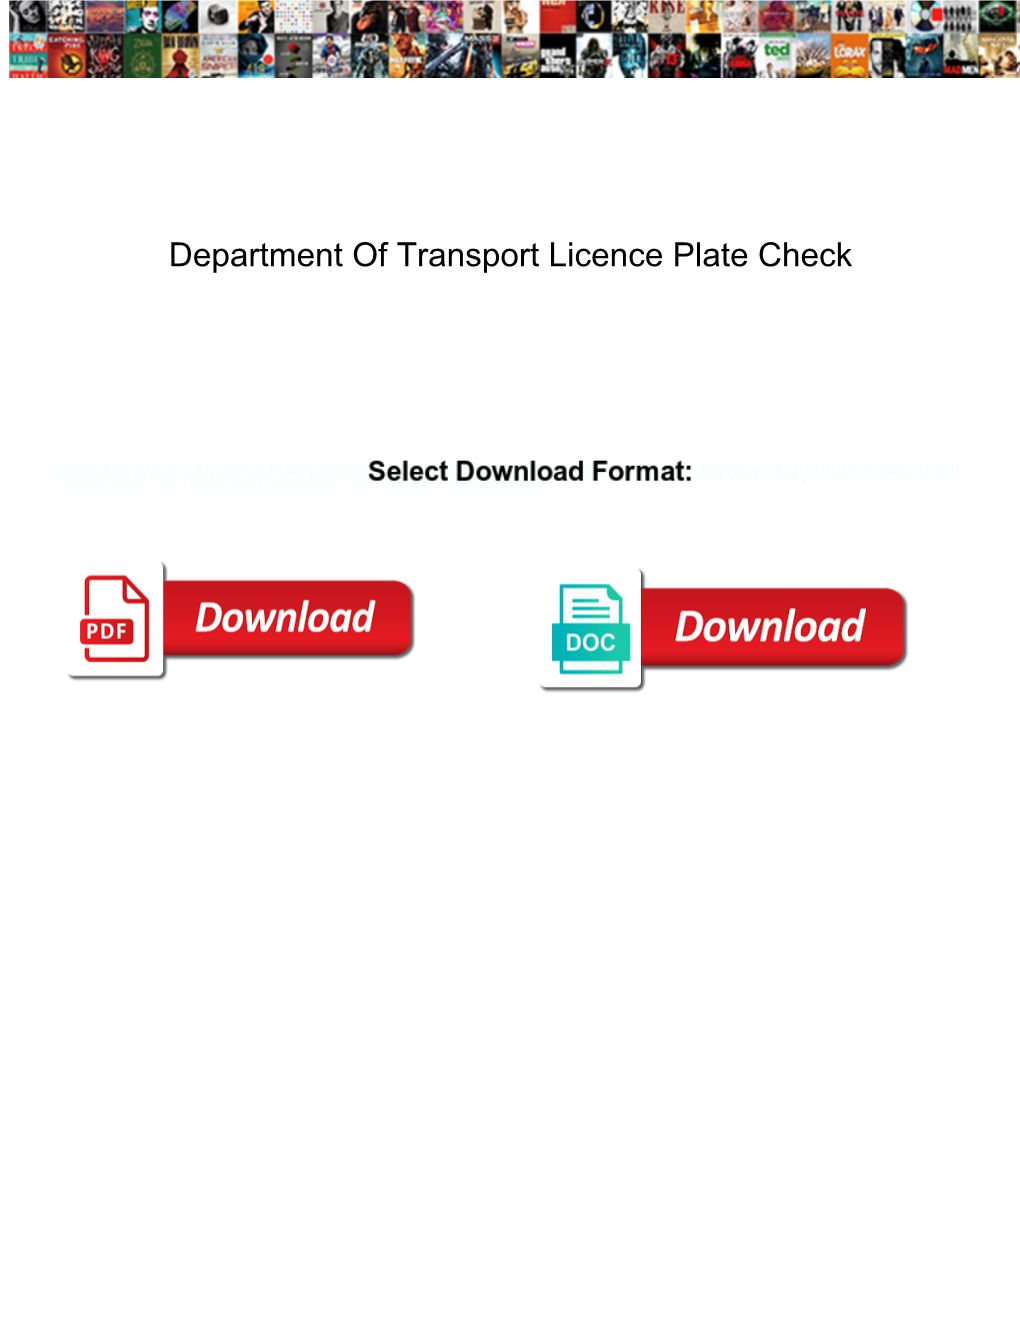 Department of Transport Licence Plate Check